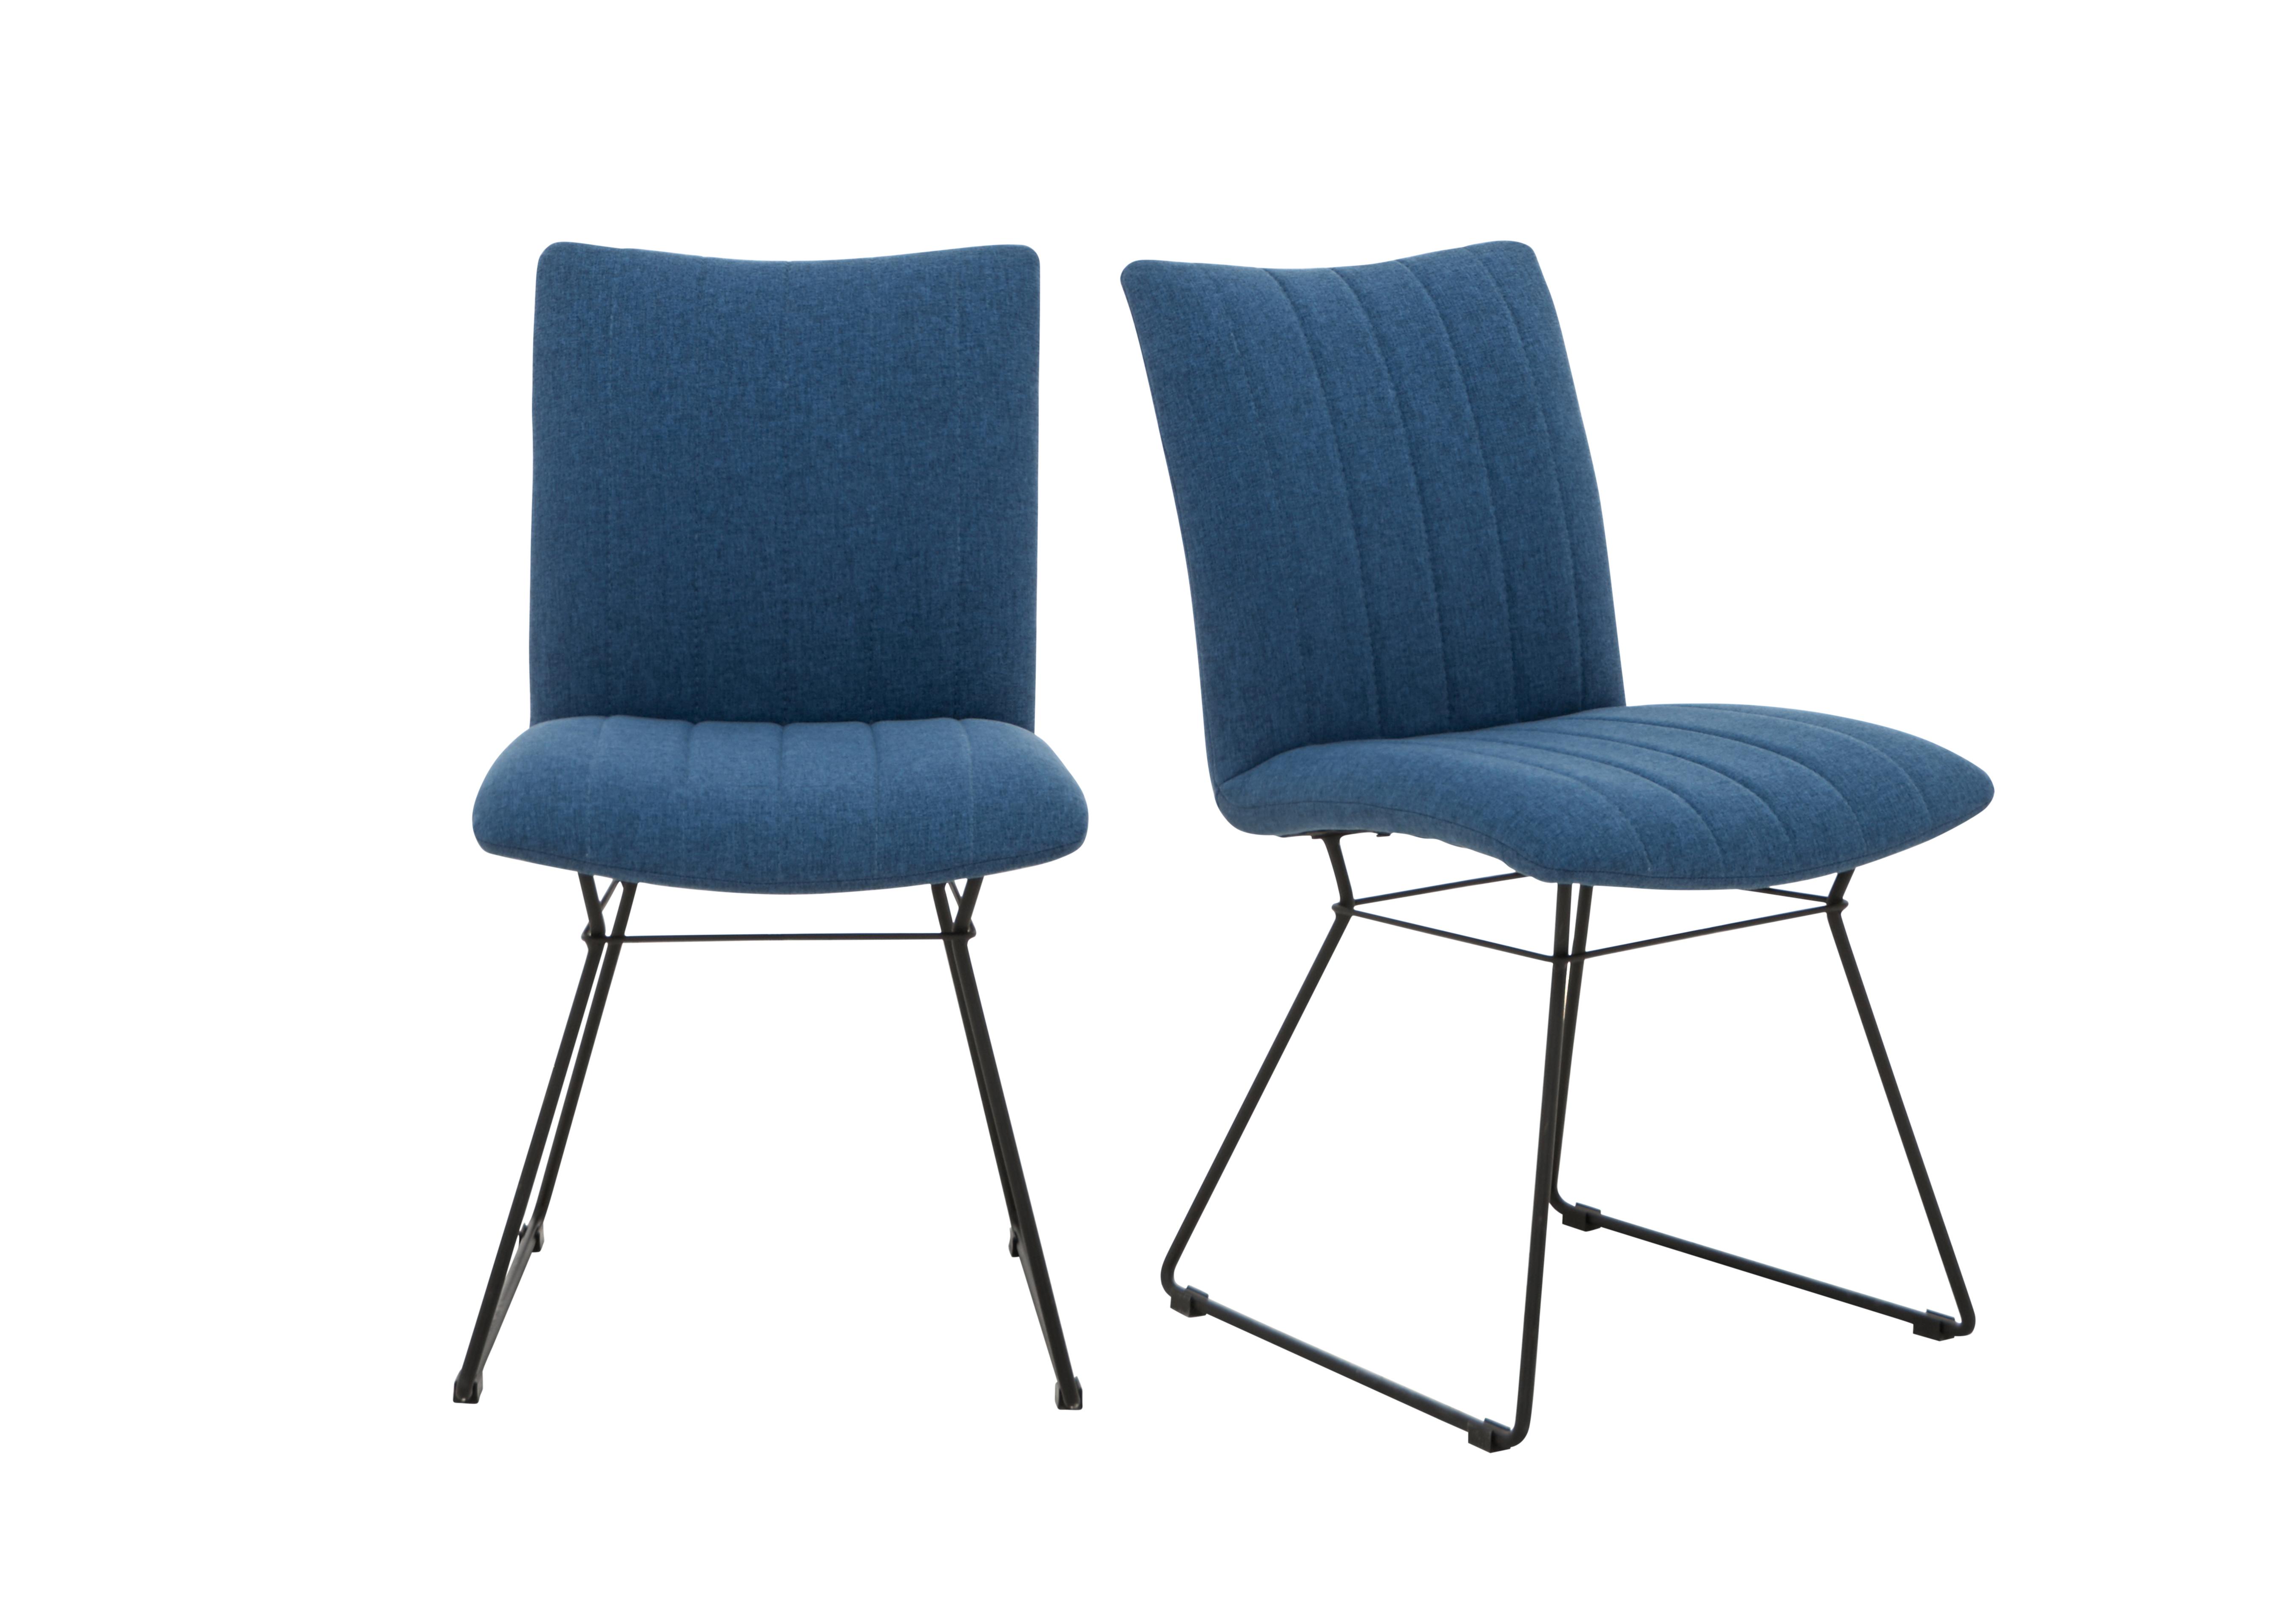 Ace Pair of Dining Chairs in Blue on Furniture Village